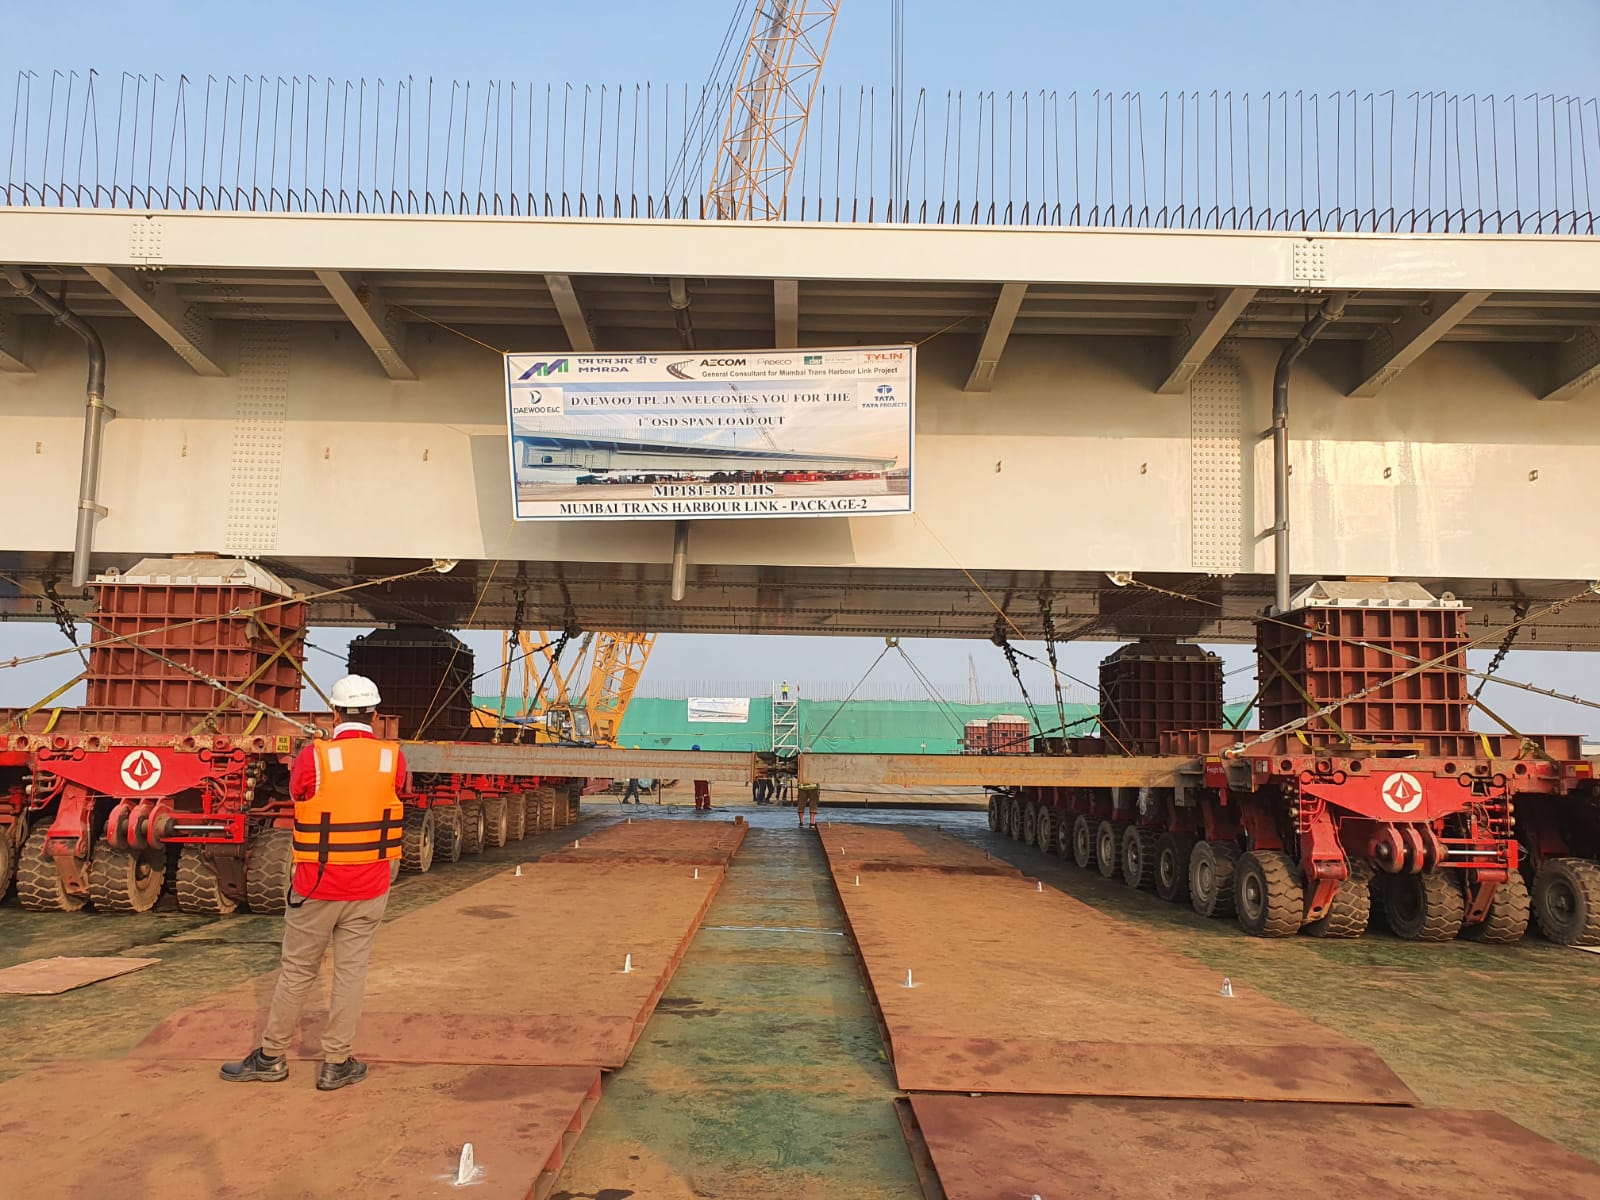 The Mumbai Trans Harbour Link (MTHL) India’s Largest Sea Bridge launches its first OSD at Package 2